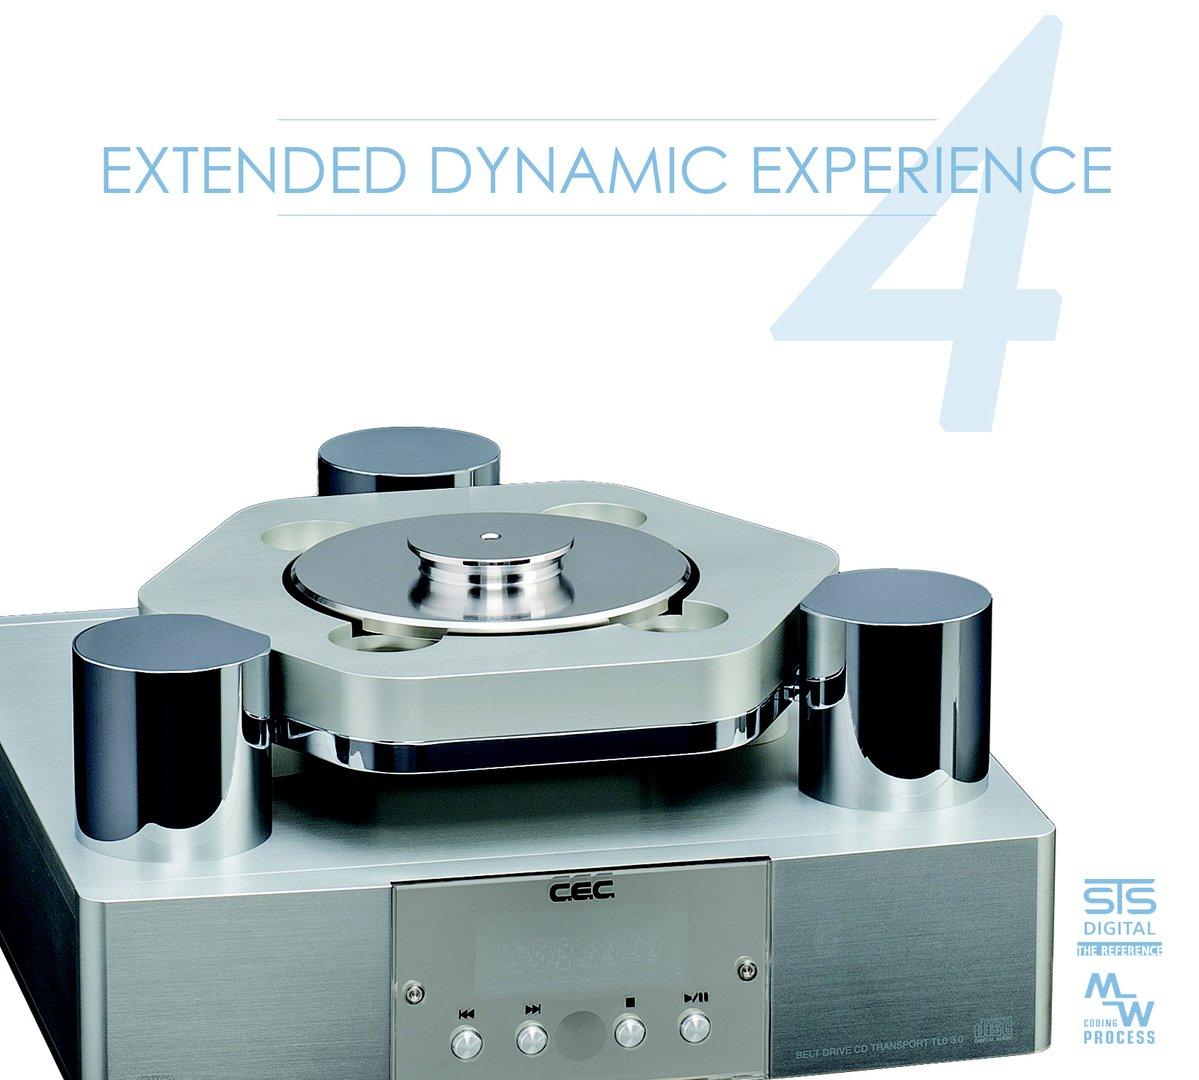 EXTENDED DYNAMIC EXPERIENCE 4 (CD - MW Coding)